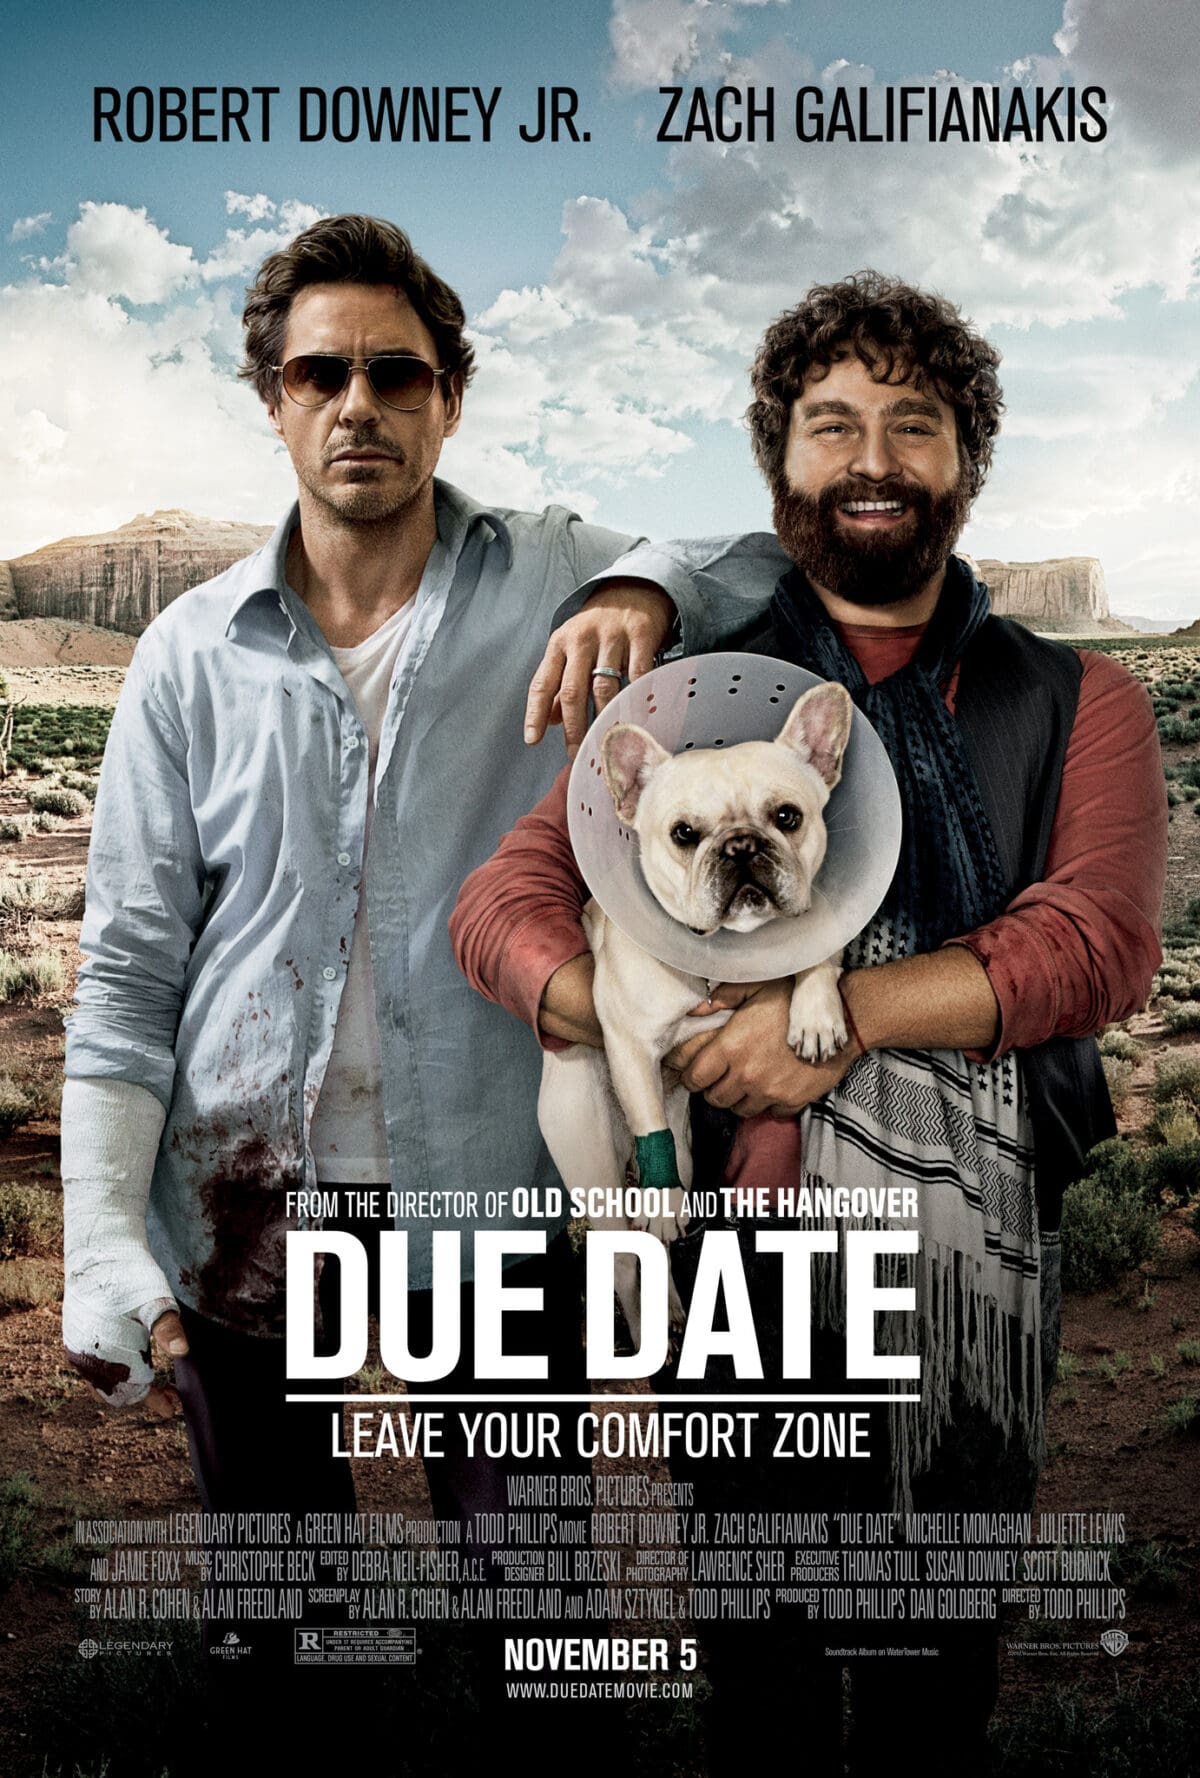 Movies Like The Hangover - Due Date